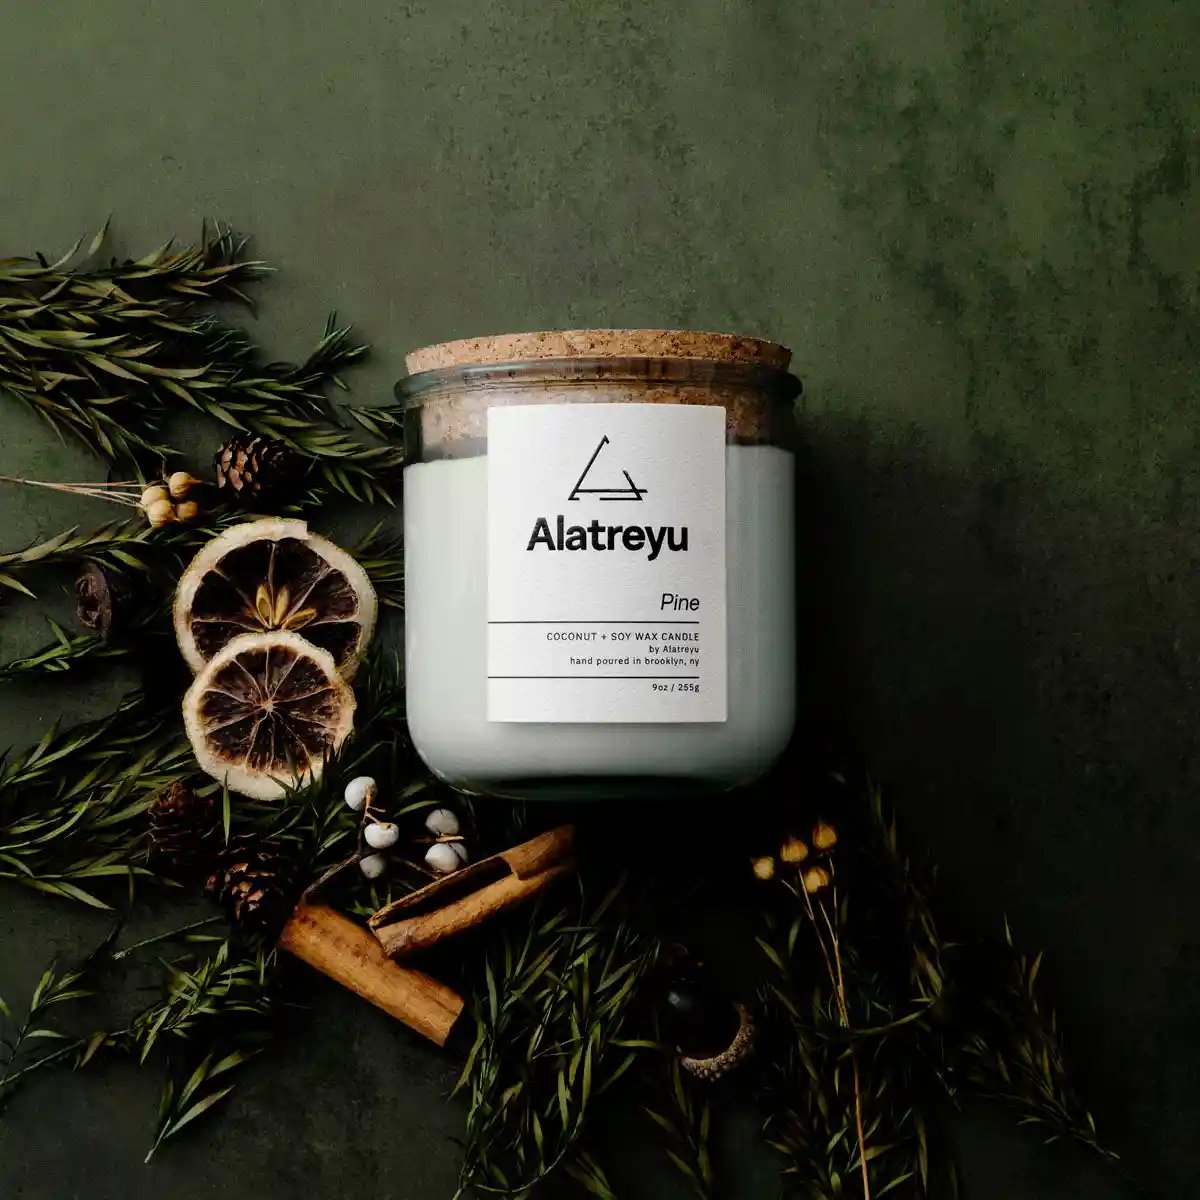 9oz Coconut and Soy Pine Needle Forest Candle by Alatreyu